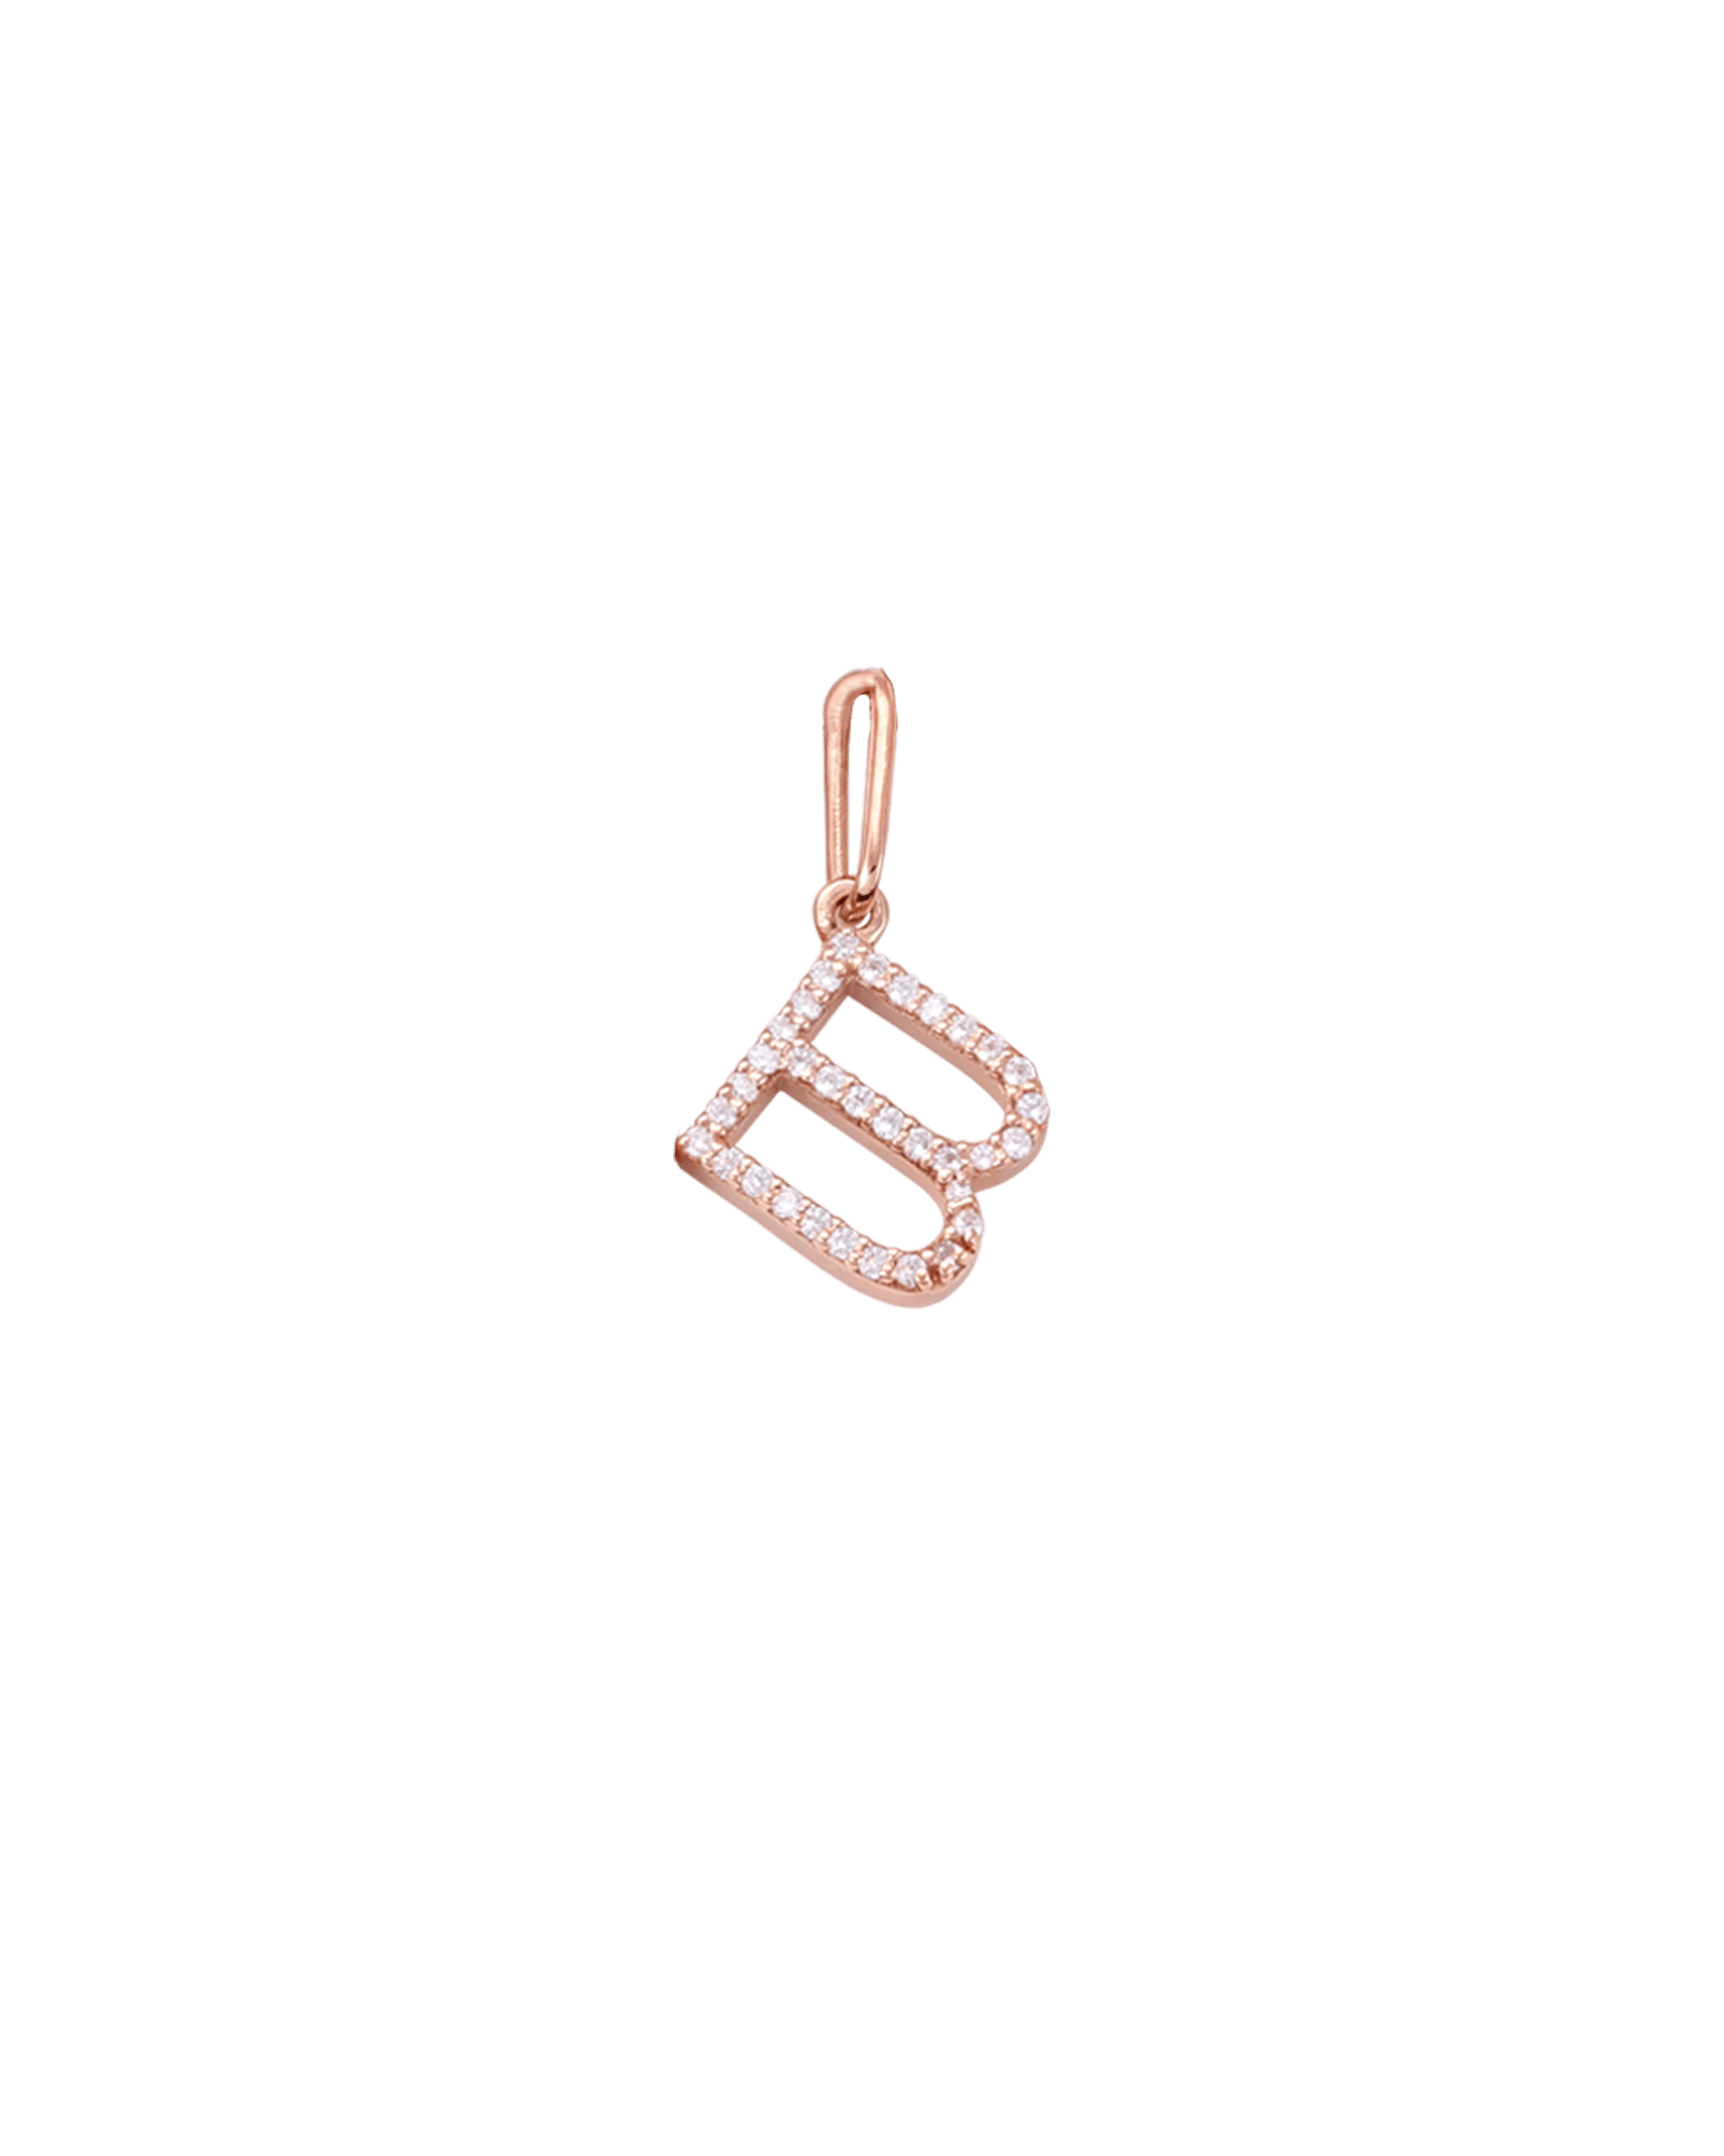 Frosted Charm - 18K Rose Vermeil Charm magal-dev 